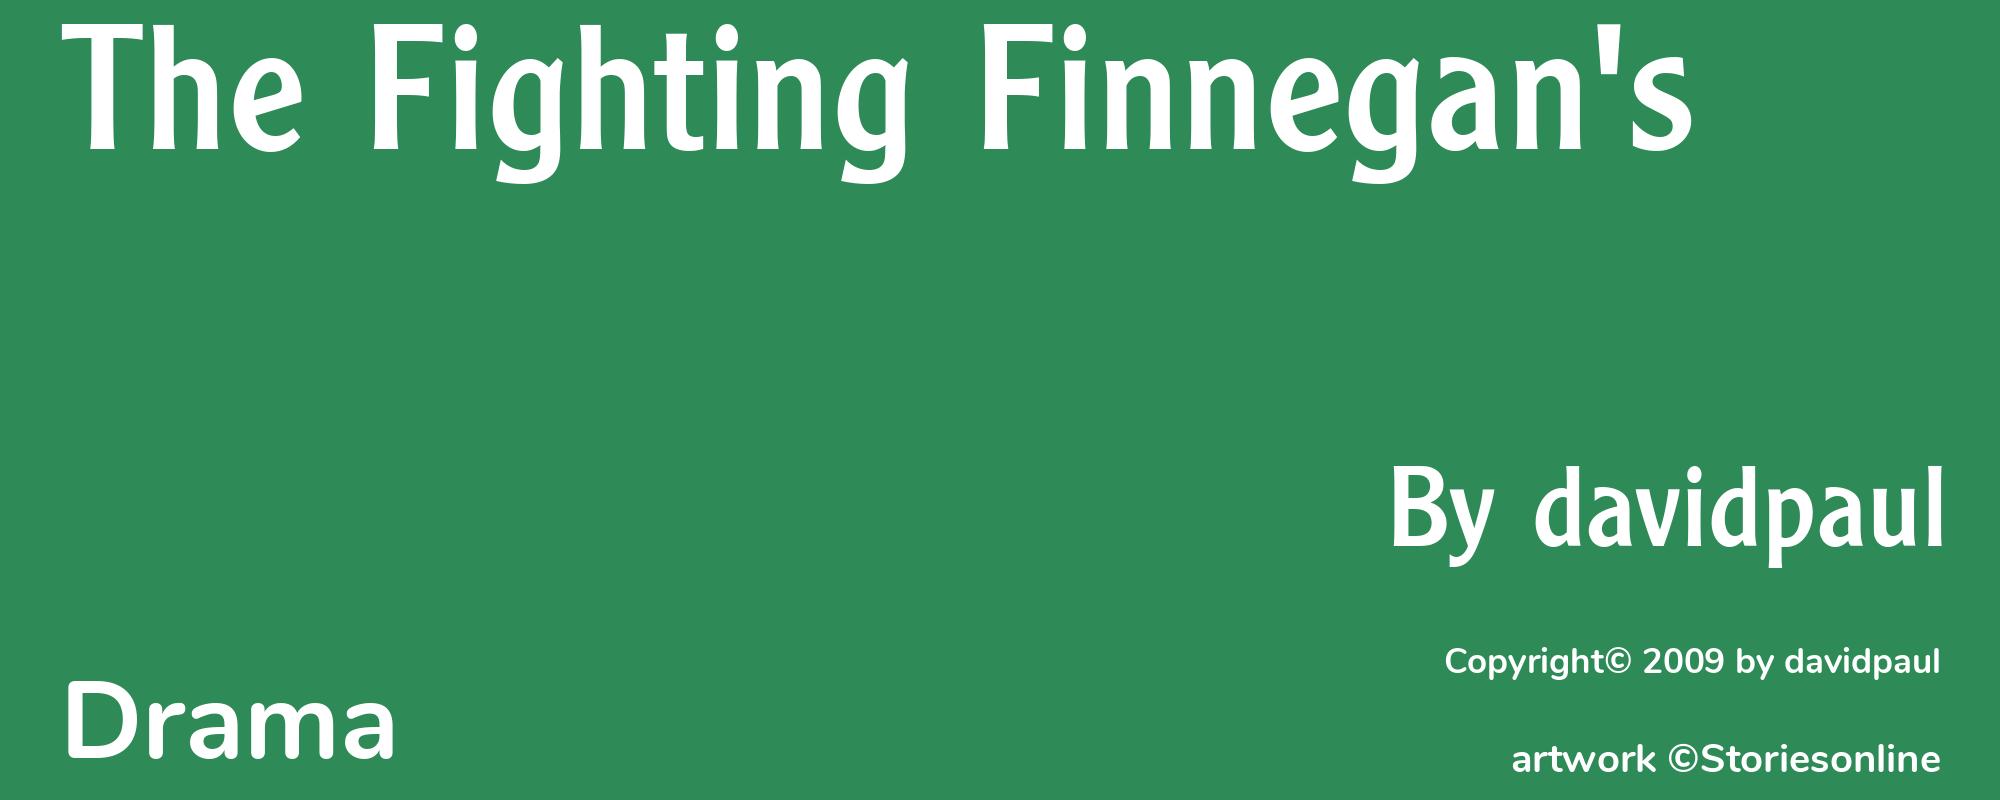 The Fighting Finnegan's - Cover